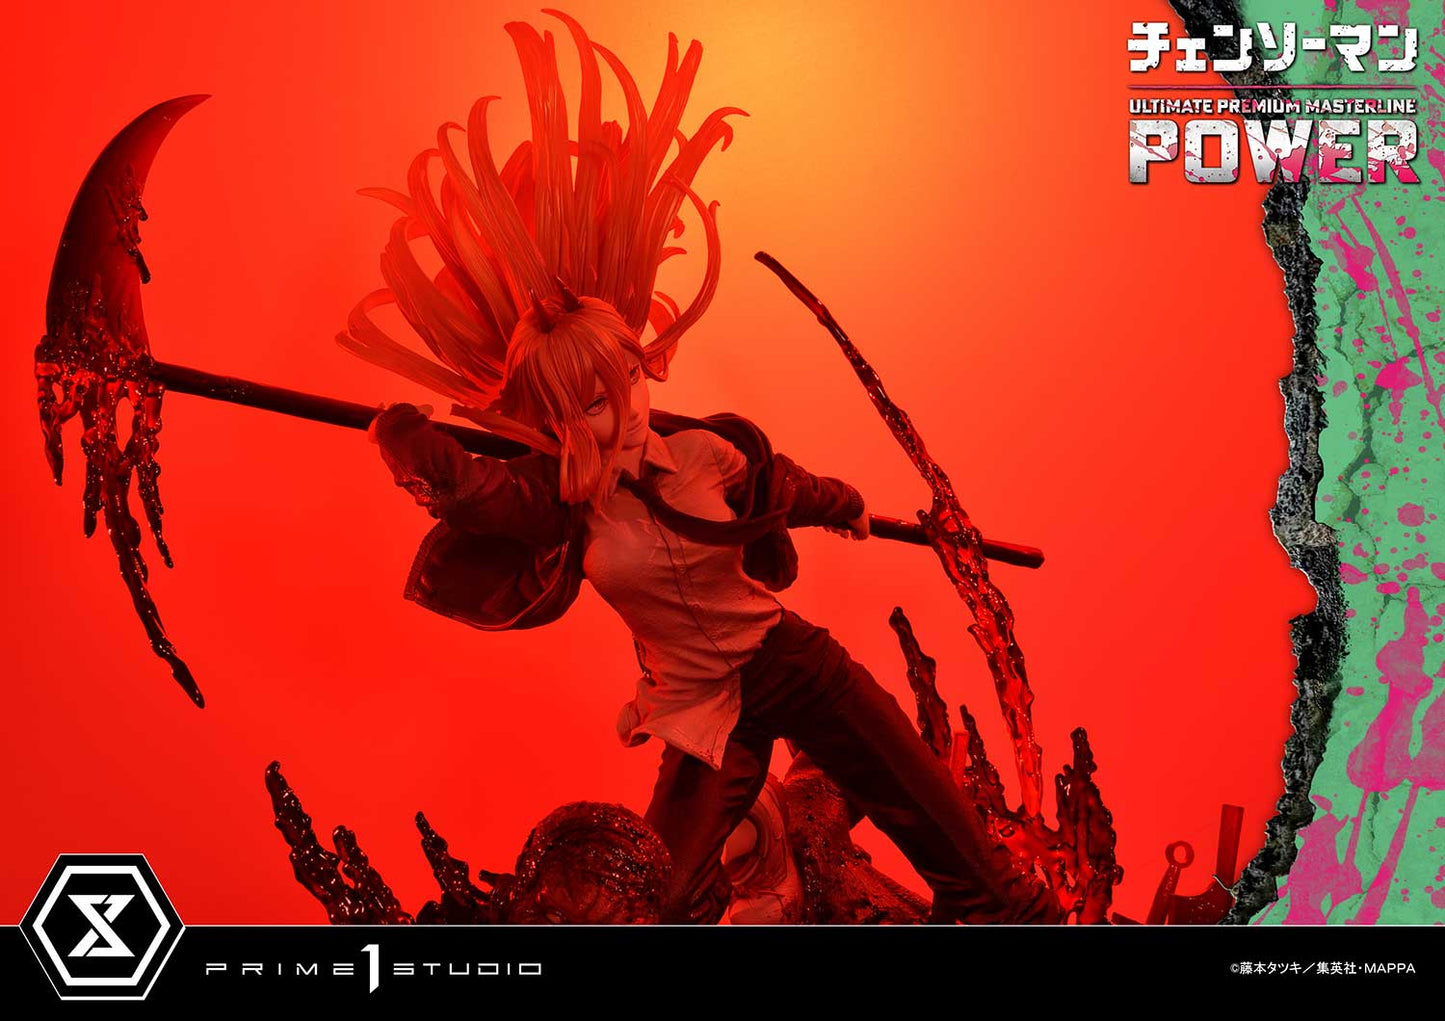 [Made-To-Order]Ultimate Premium Masterline "Chainsaw Man" Power